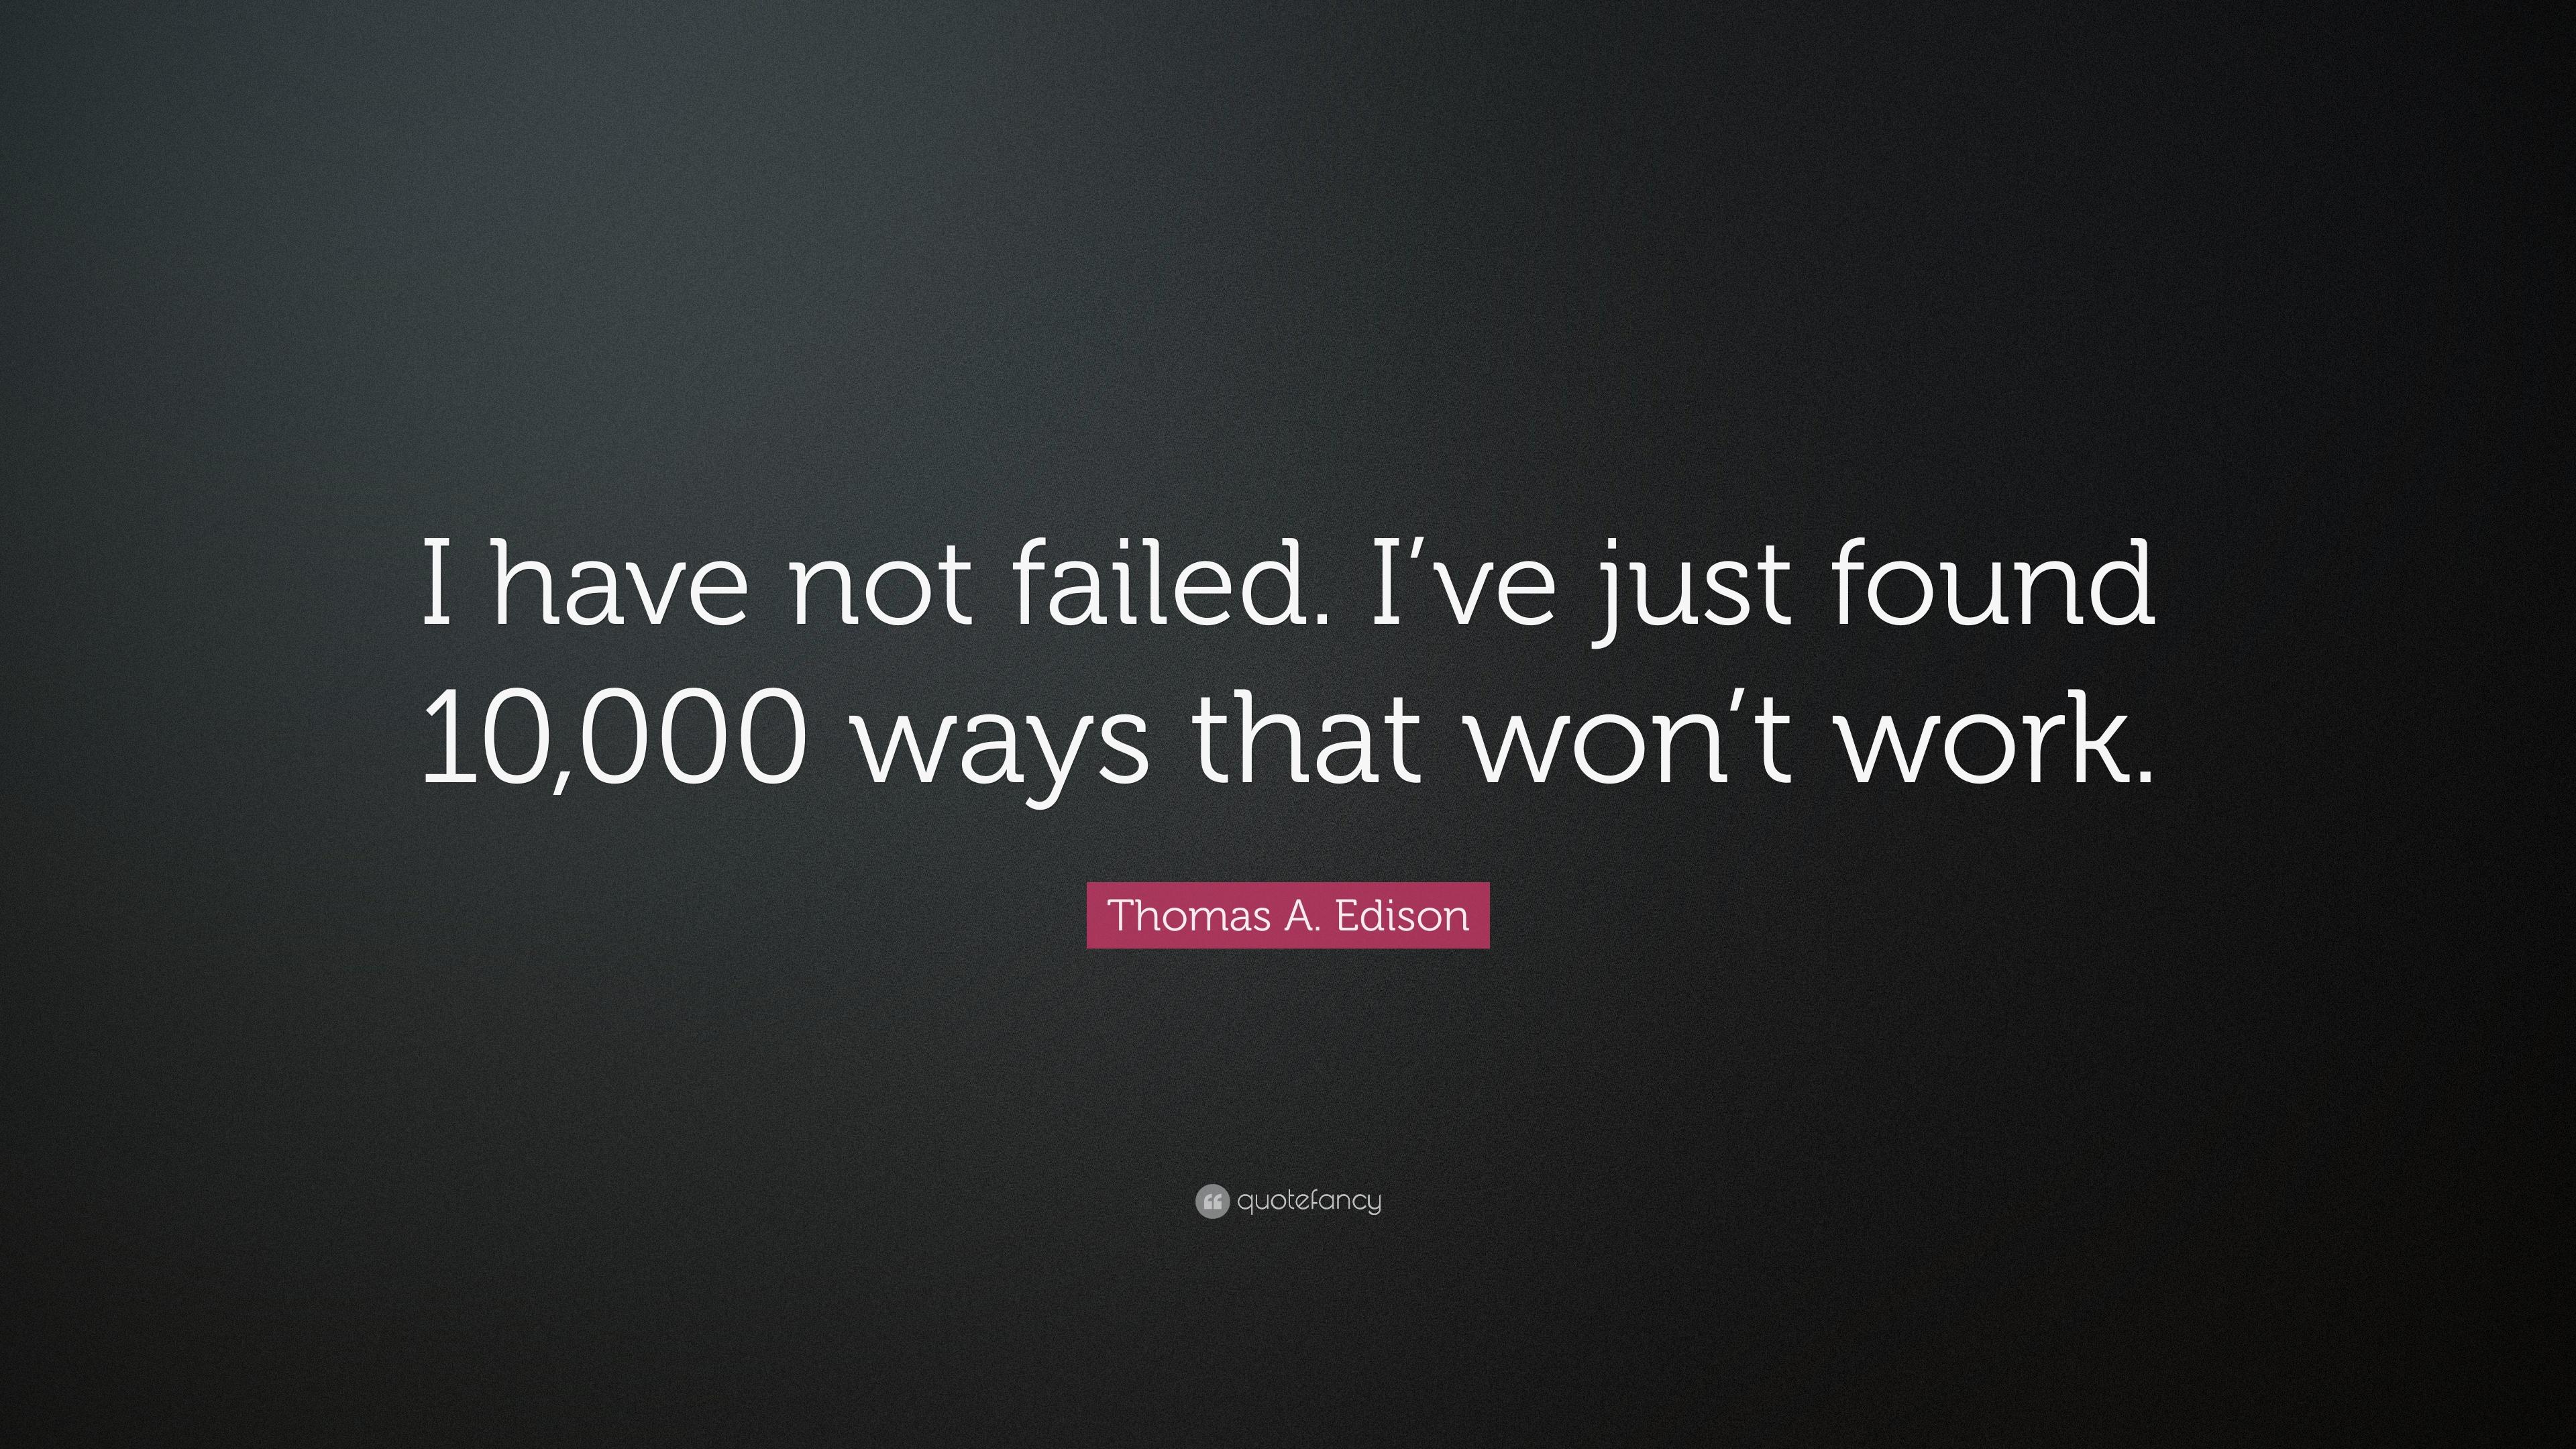 Thomas A. Edison Quote: “I have not failed. I've just found 000